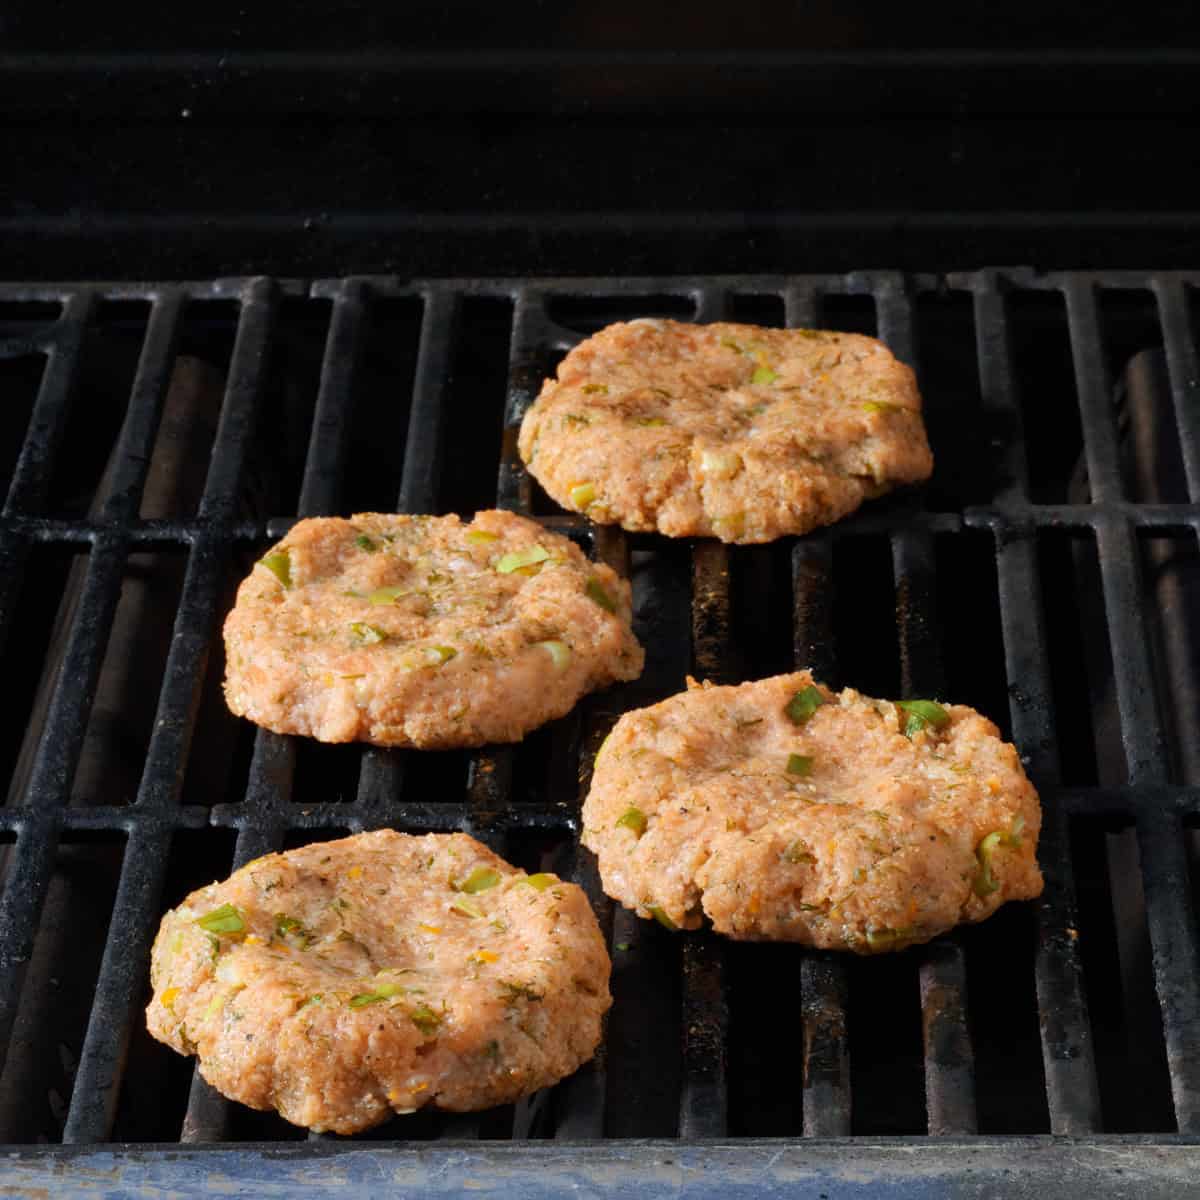 Four salmon burgers cooking on a grill.